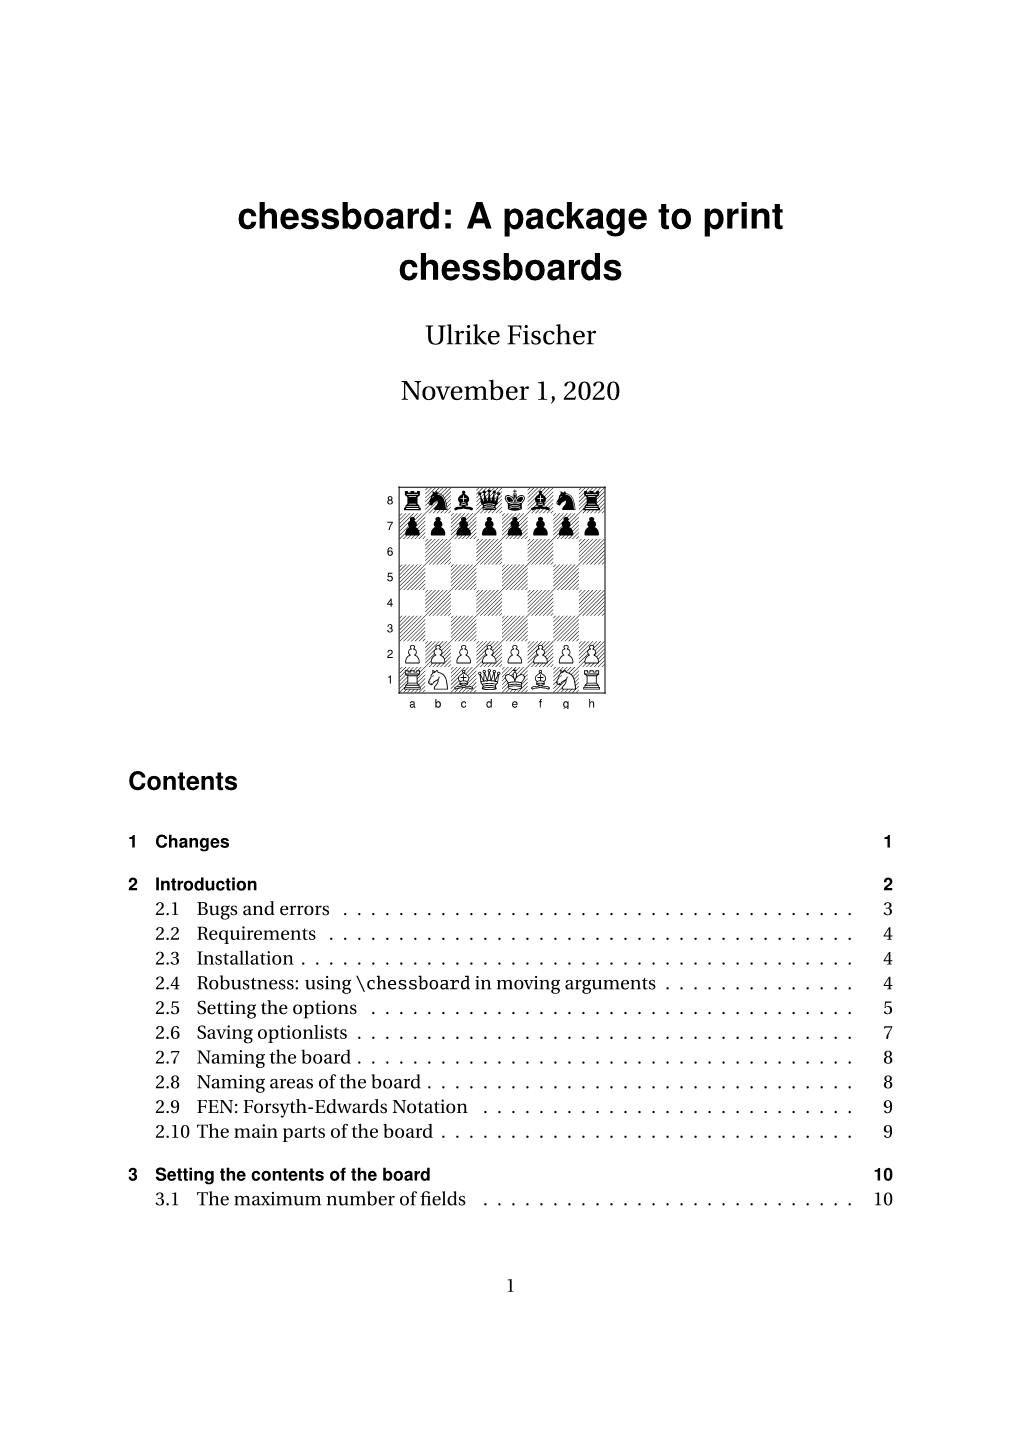 A Package to Print Chessboards